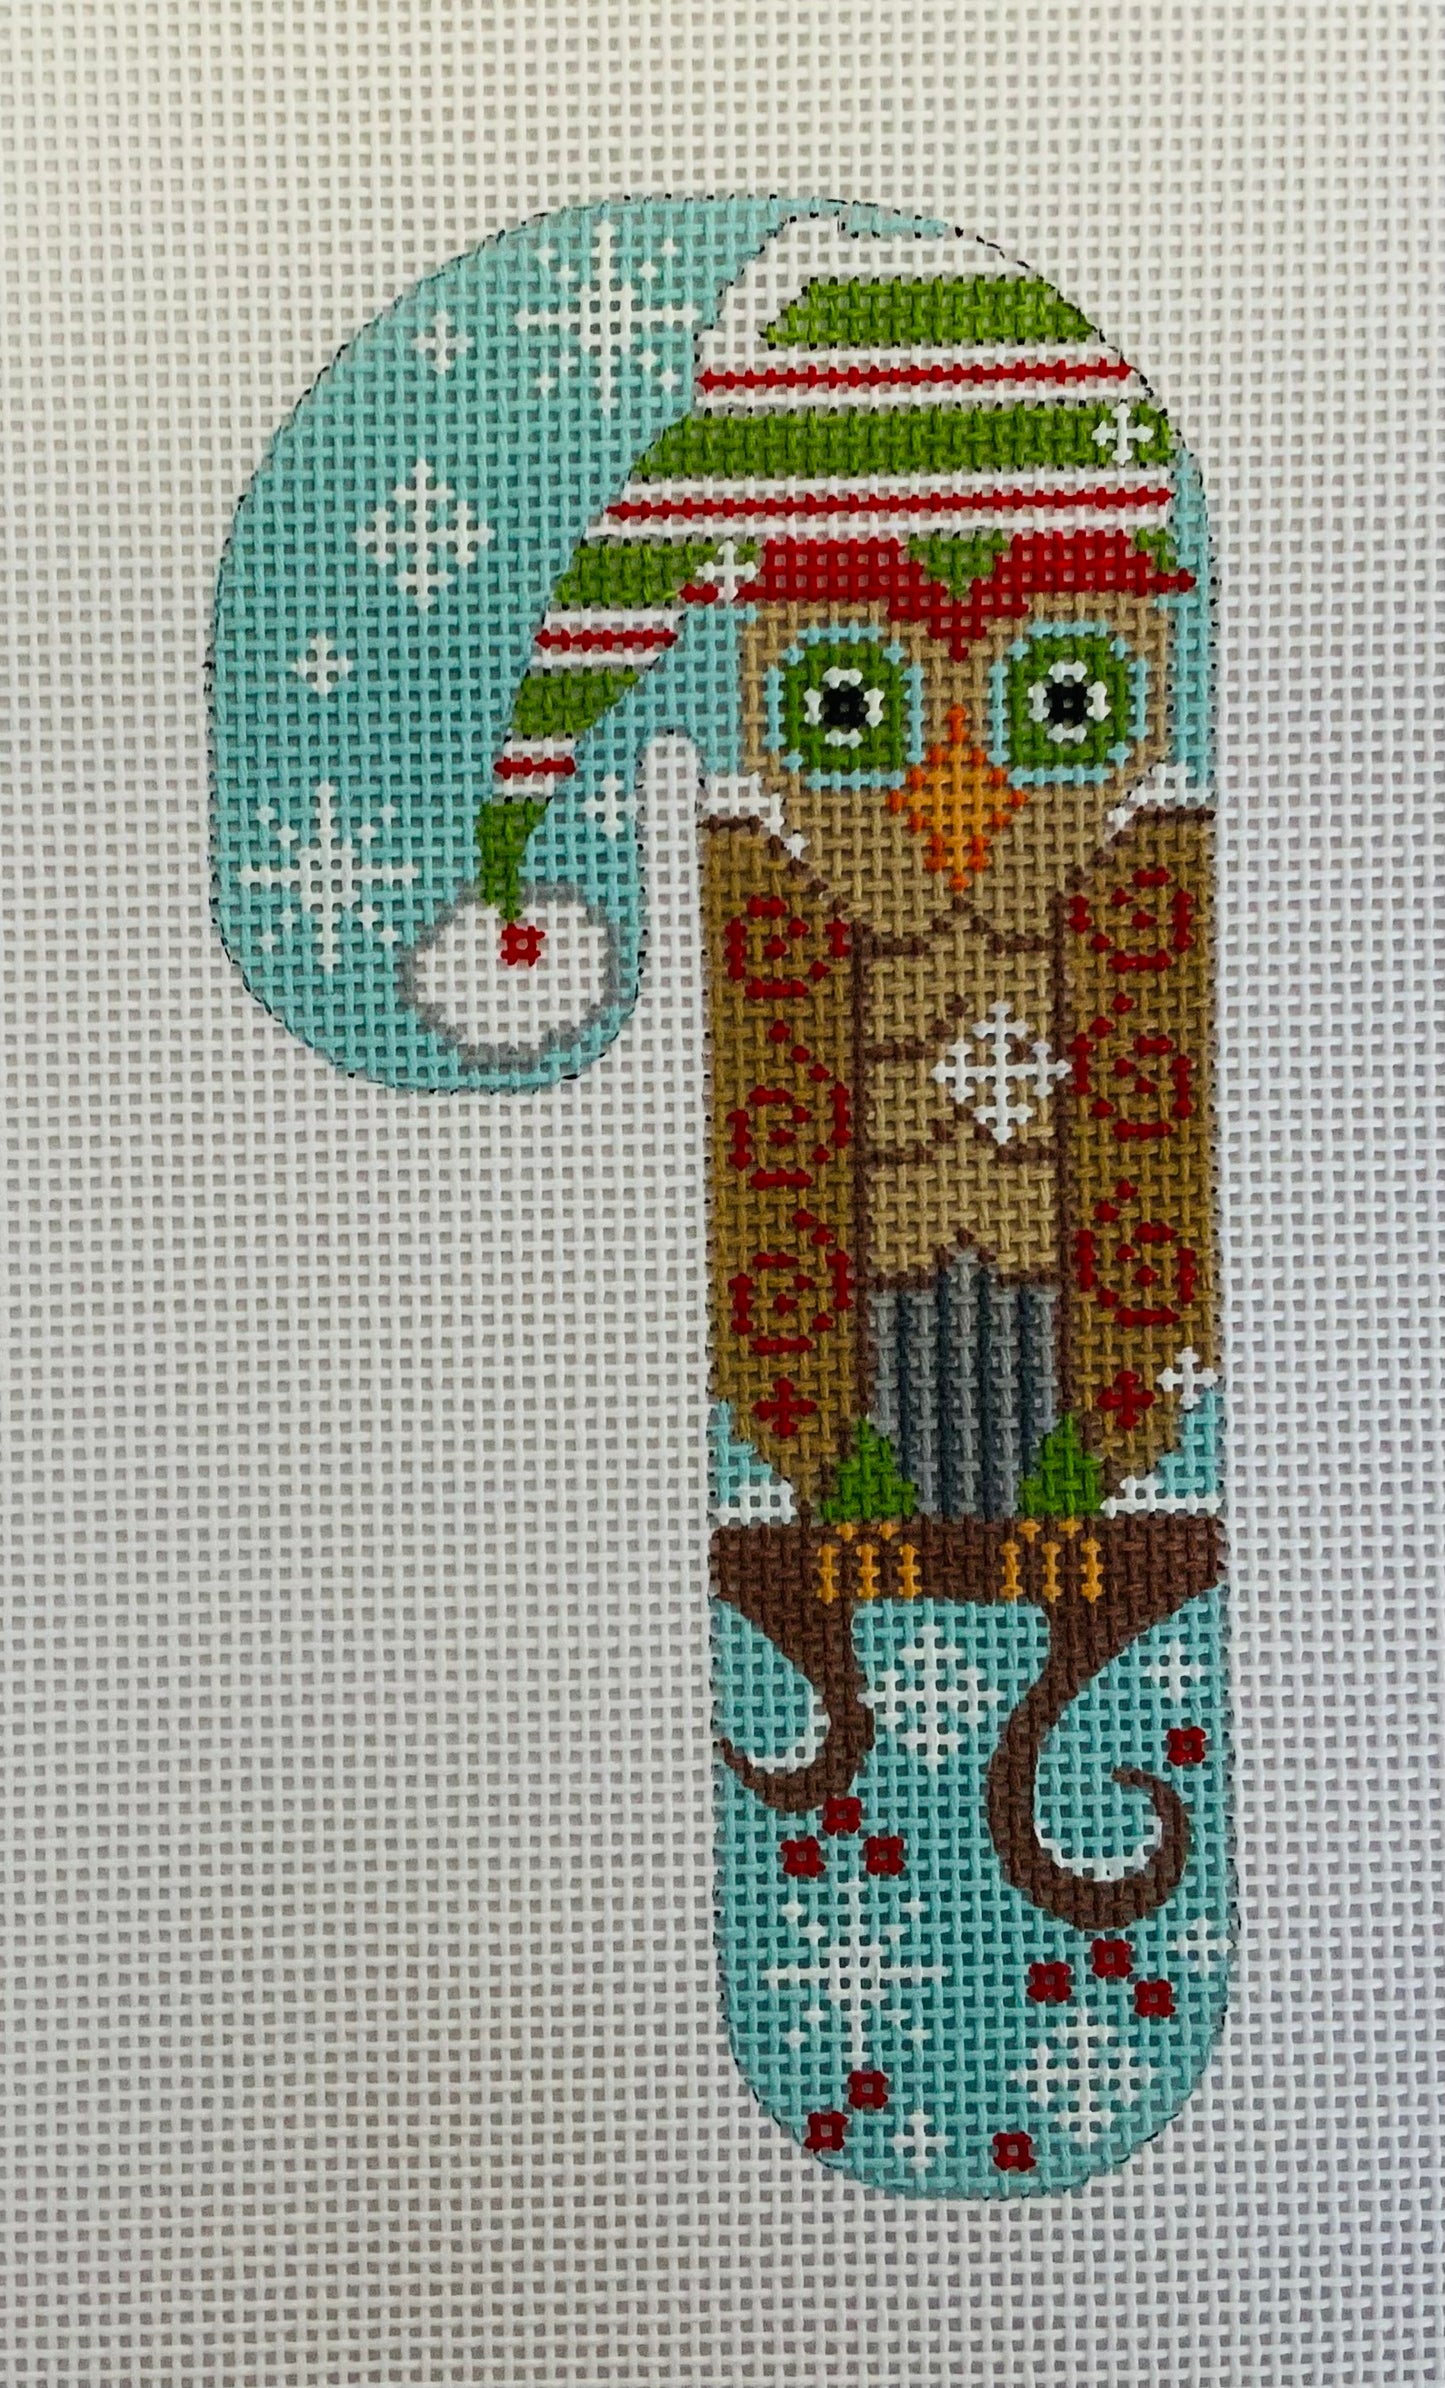 Candy Cane Owl